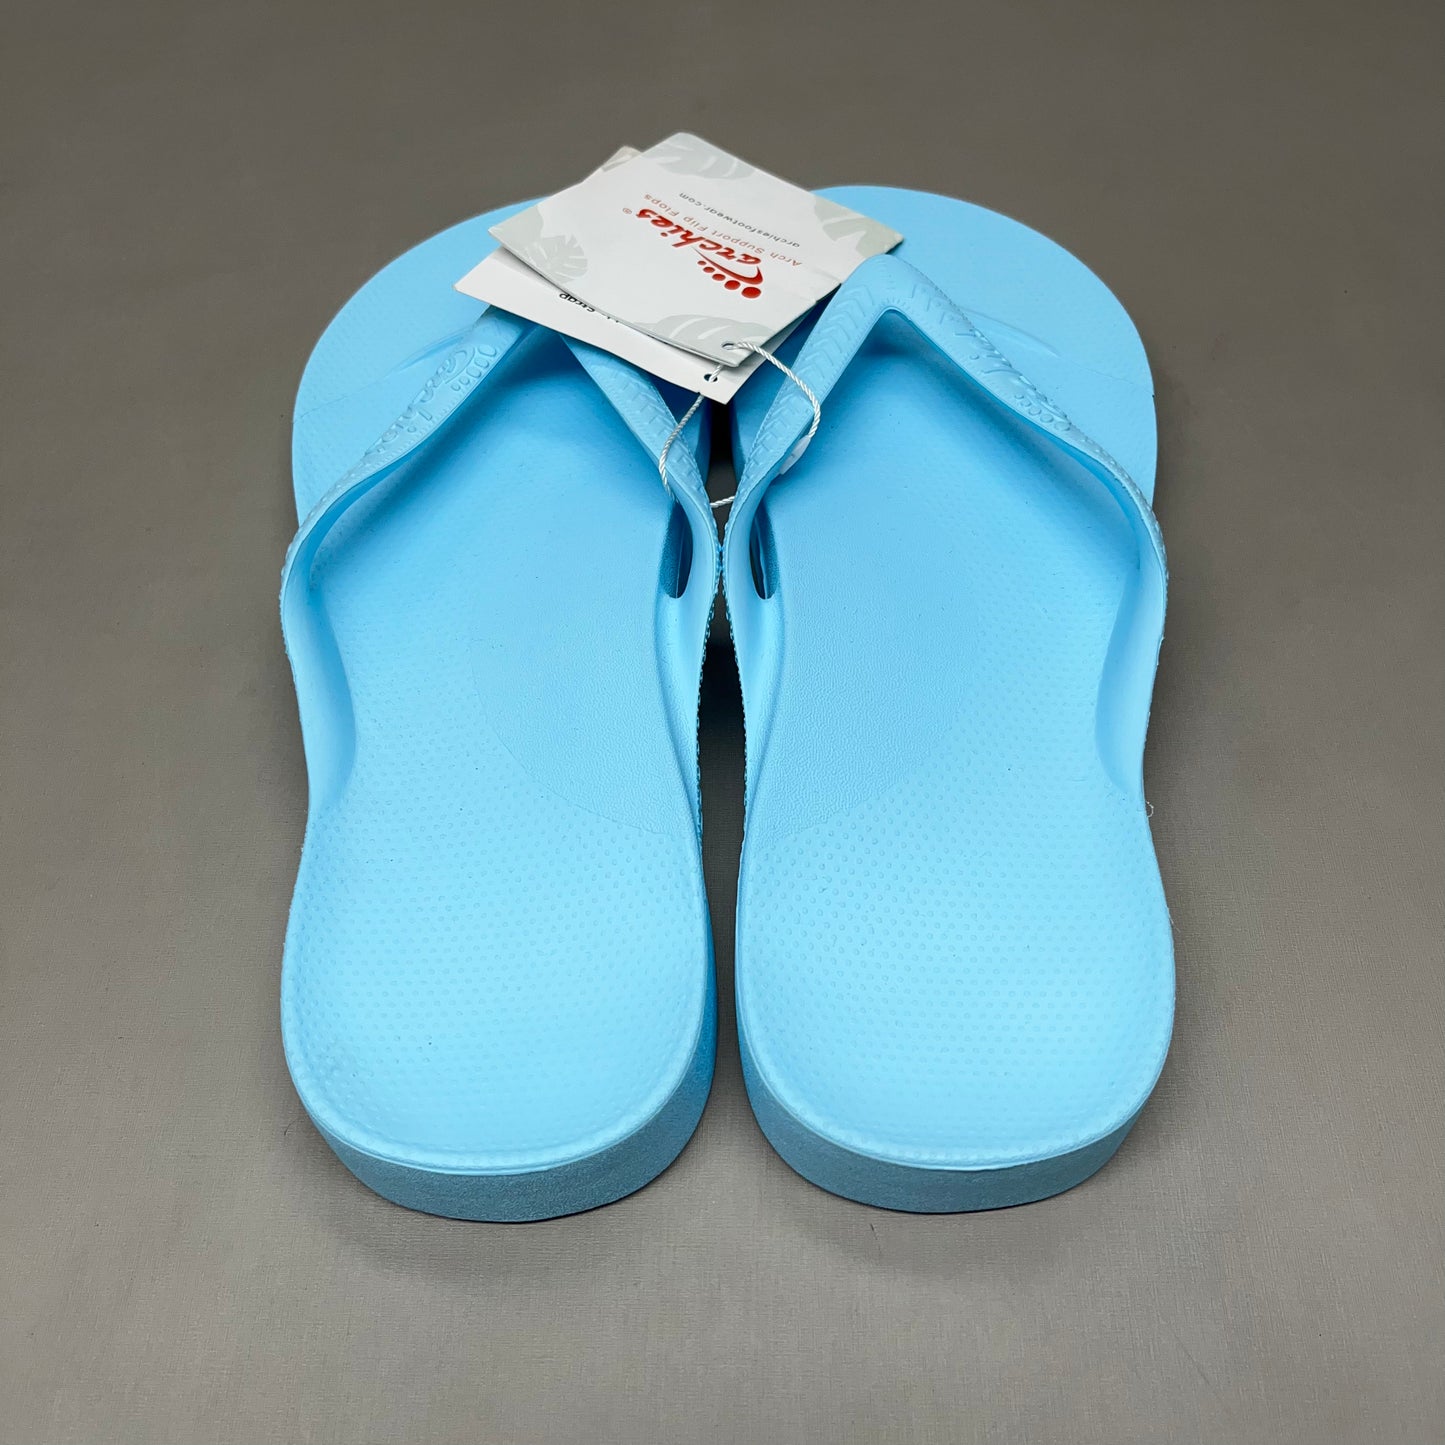 ARCHIES Arch Support Thongs HIGH SUPPORT Flip Flops Wmn's Sz 5 Men's 4 baby blue (New)